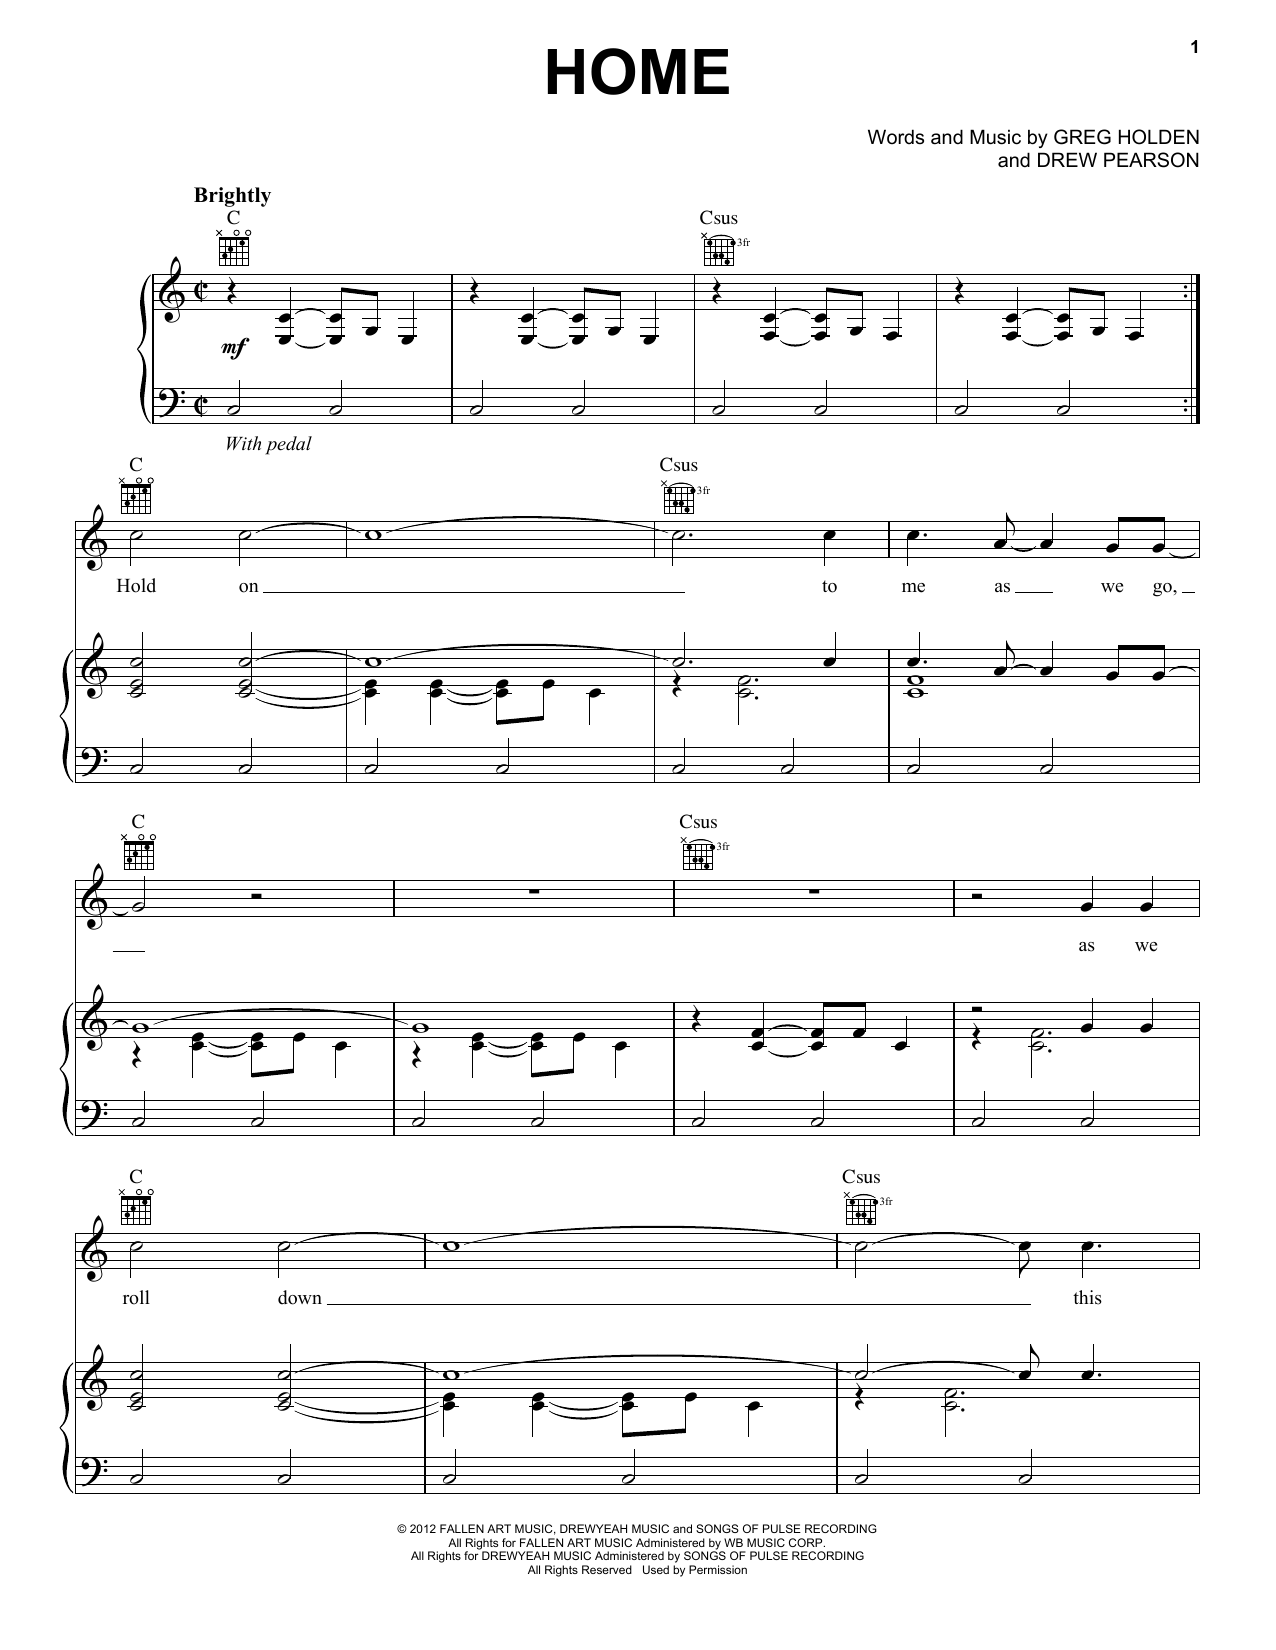 Phillip Phillips Home sheet music notes and chords. Download Printable PDF.